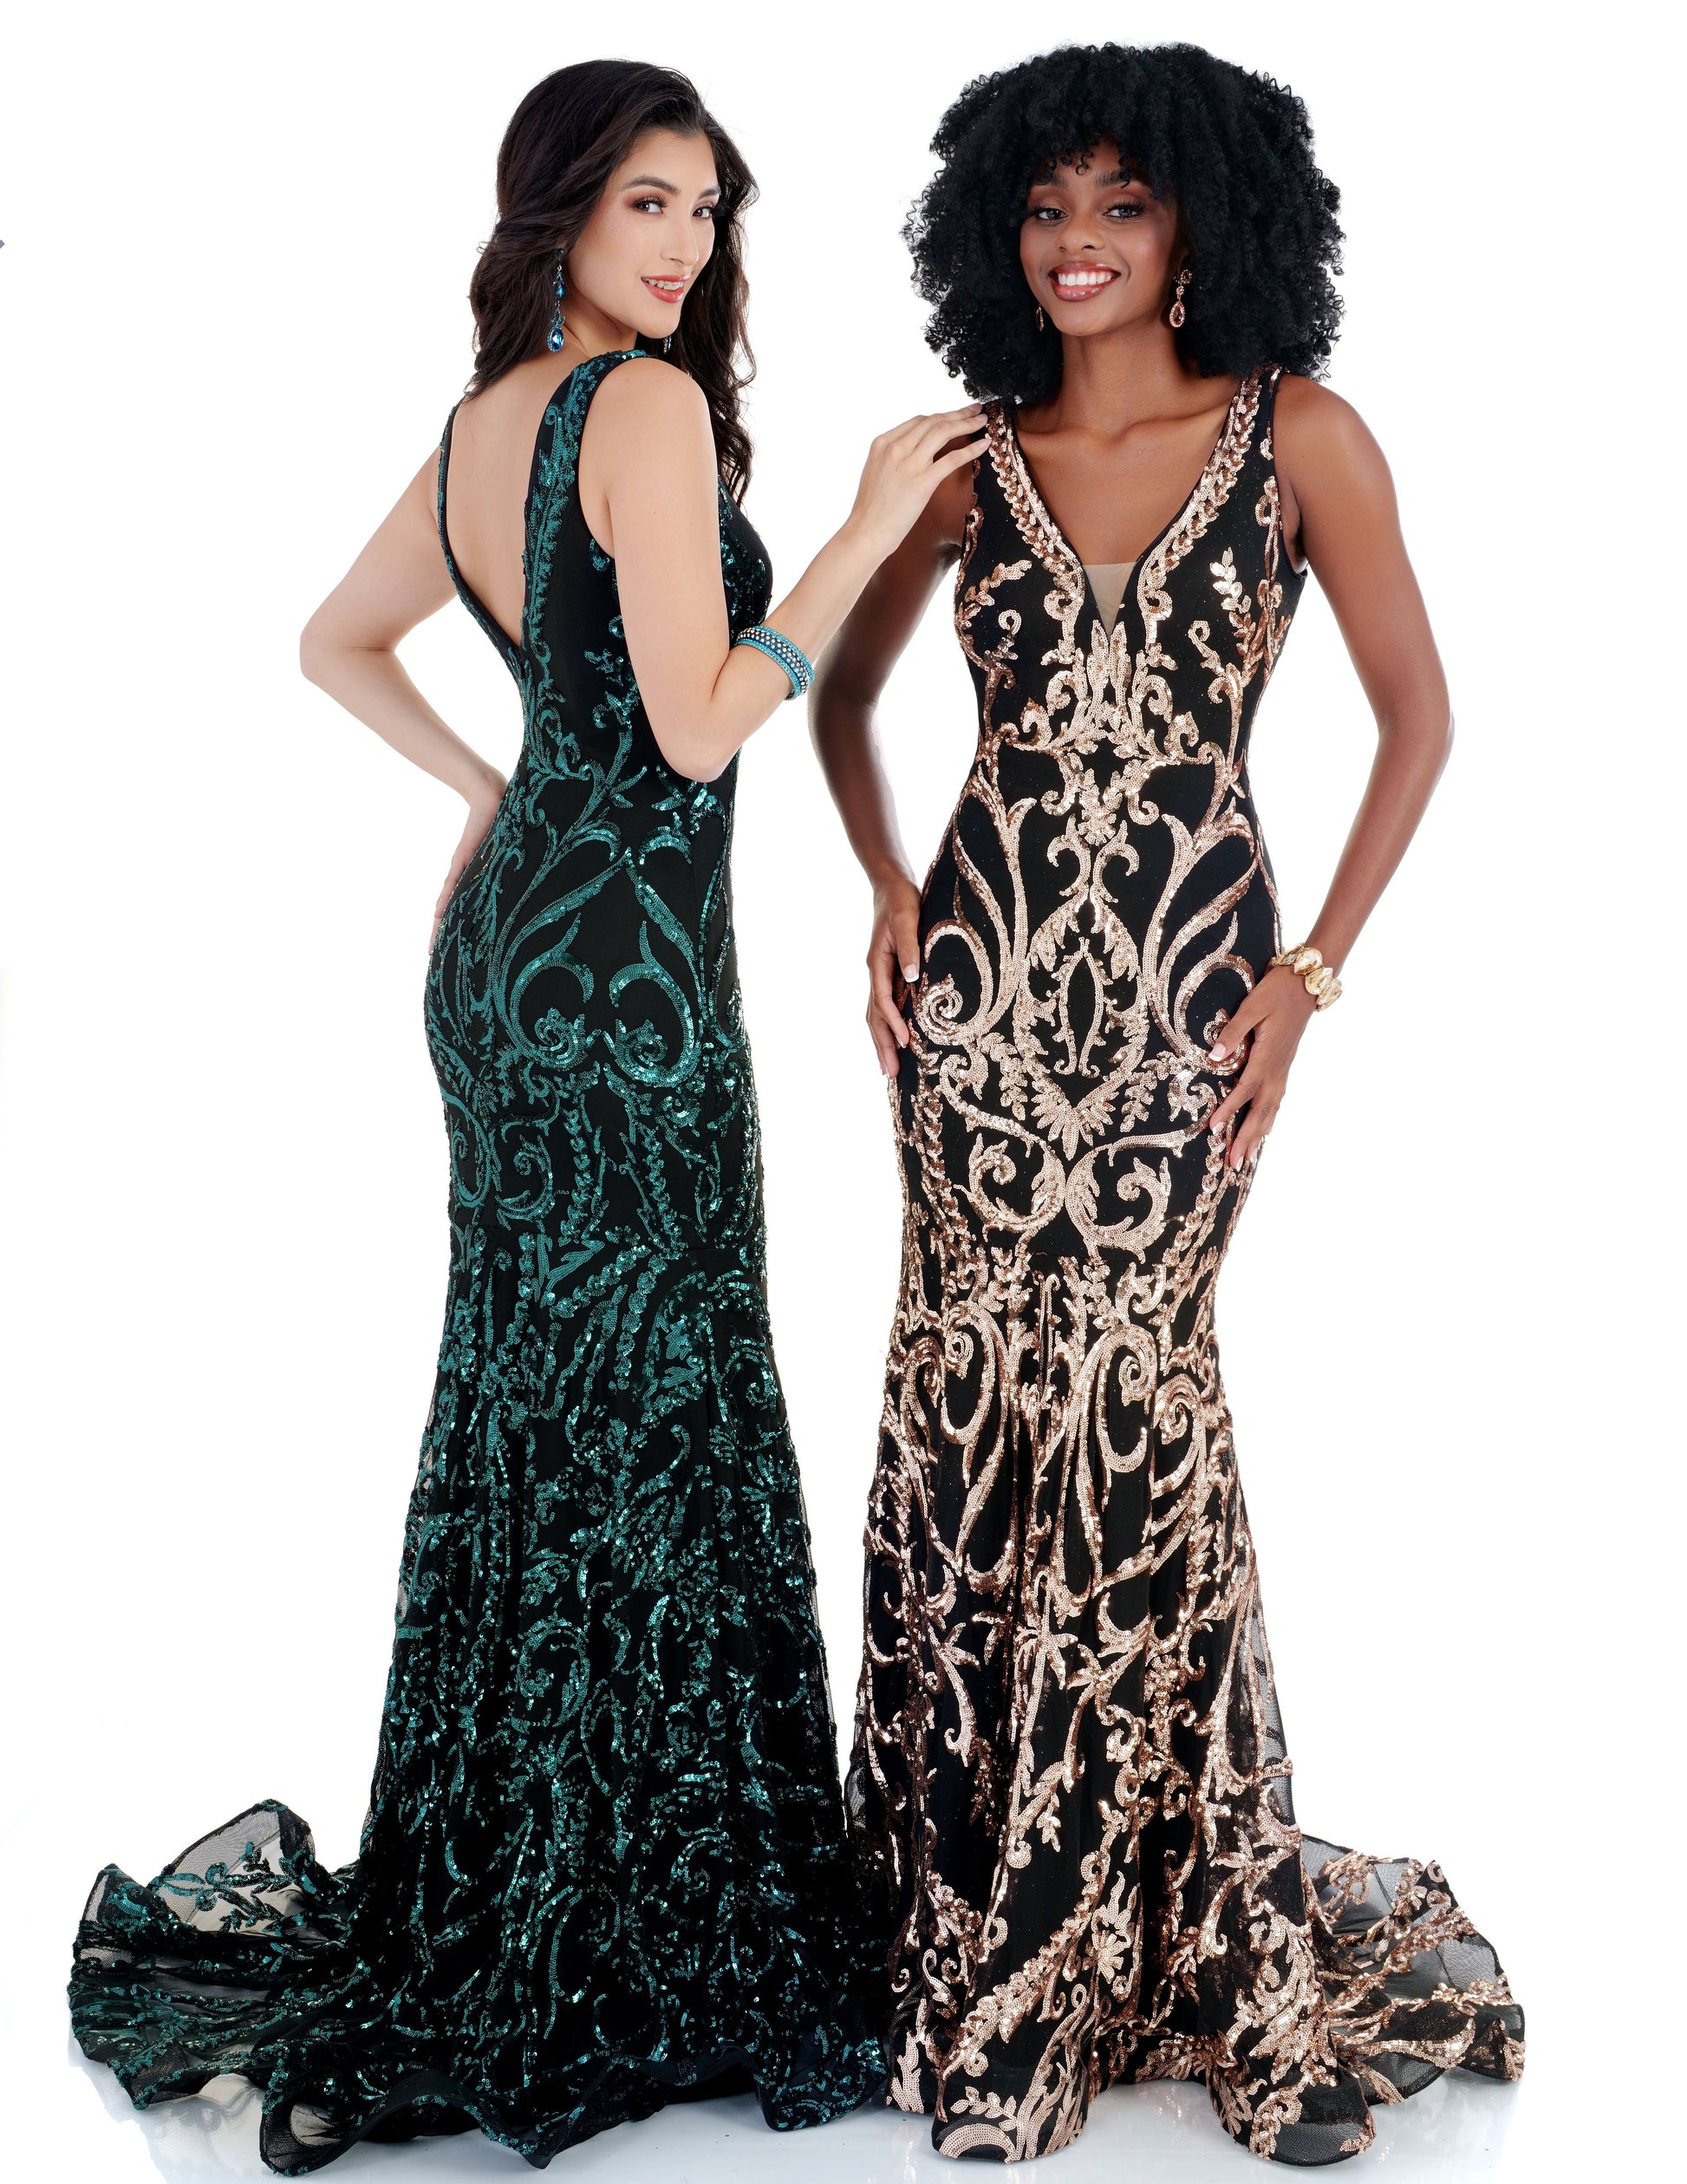 Cecilia Couture 2186 Long Fitted Sequin Lace Mermaid Prom Dress V Neck Formal Gown  Sizes: 0-20  Colors: Black/Gold, Hunter Green